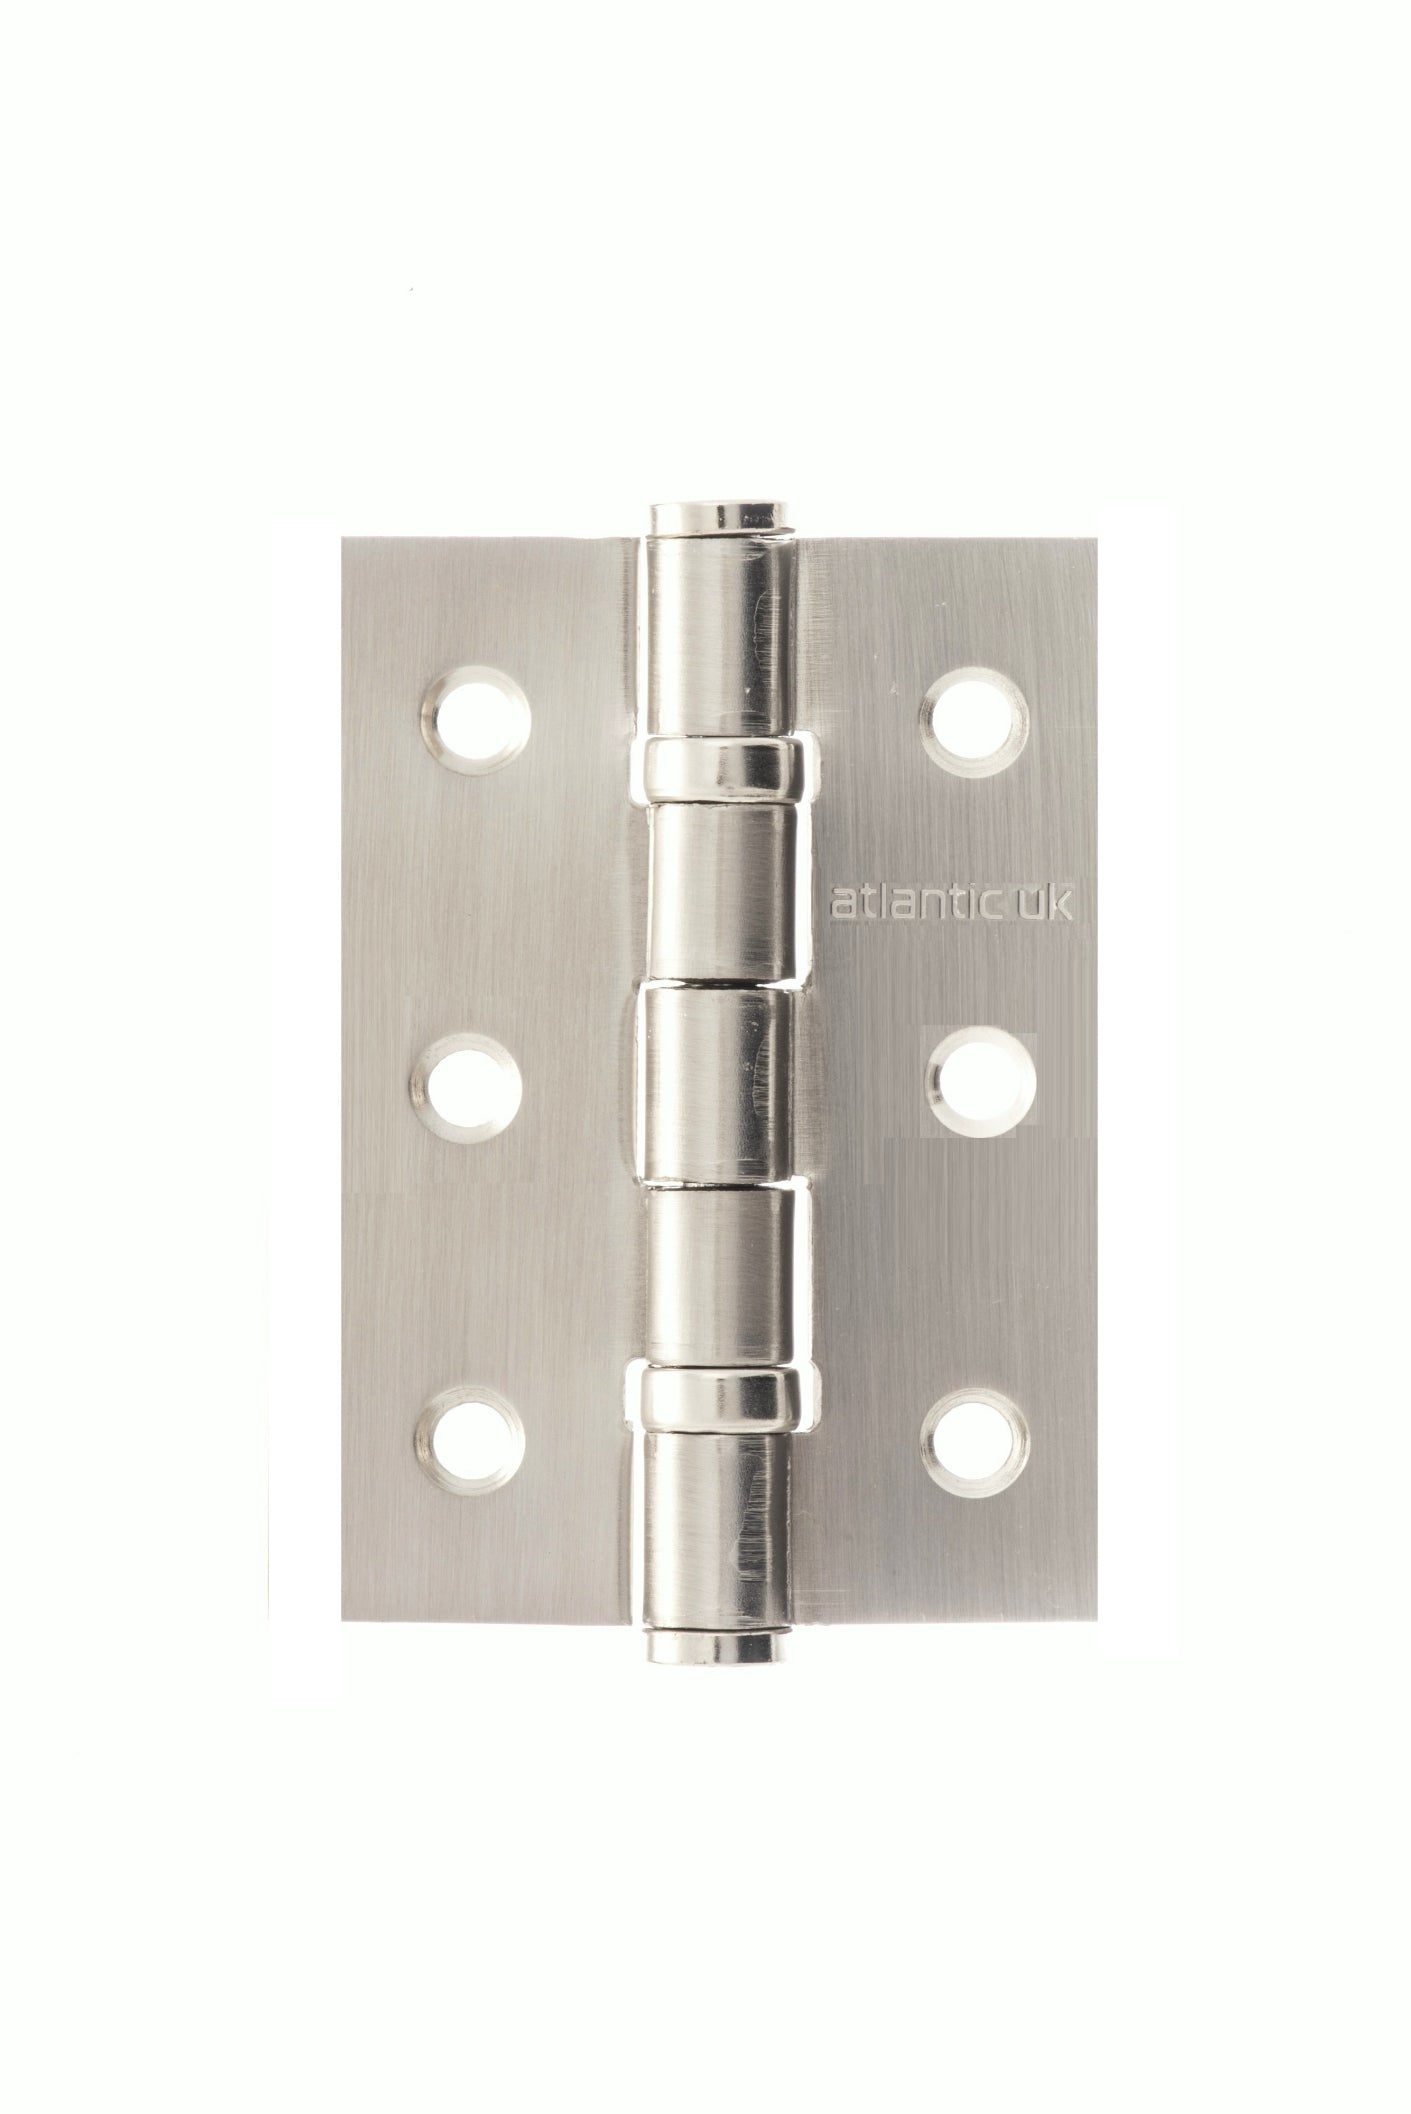 Atlantic CE FIRE RATED Ball Bearing Hinges 3" x 2" x 2mm - Satin Stainless Steel